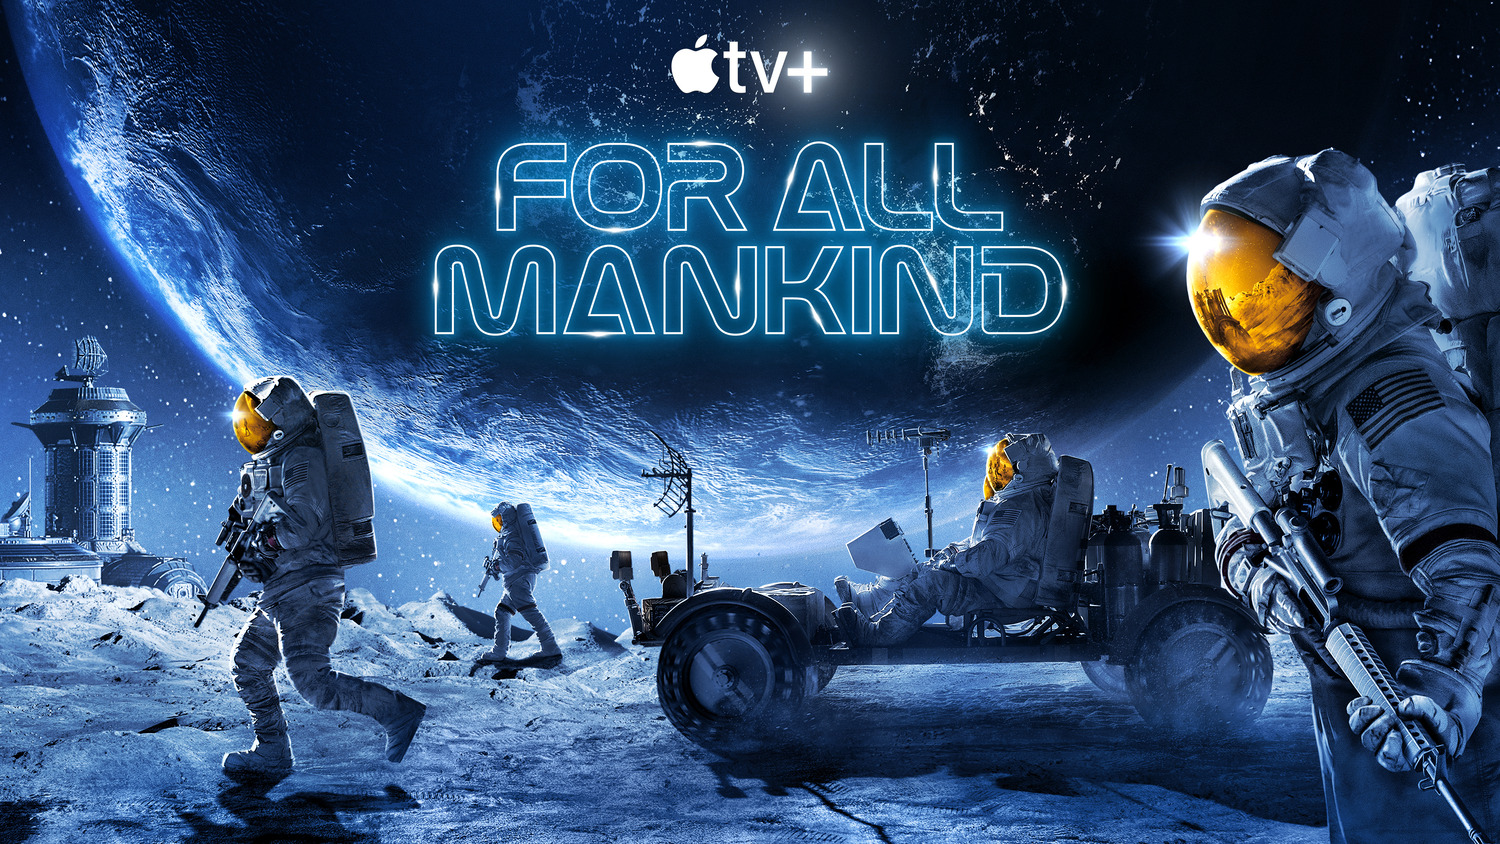 Extra Large TV Poster Image for For All Mankind (#4 of 7)